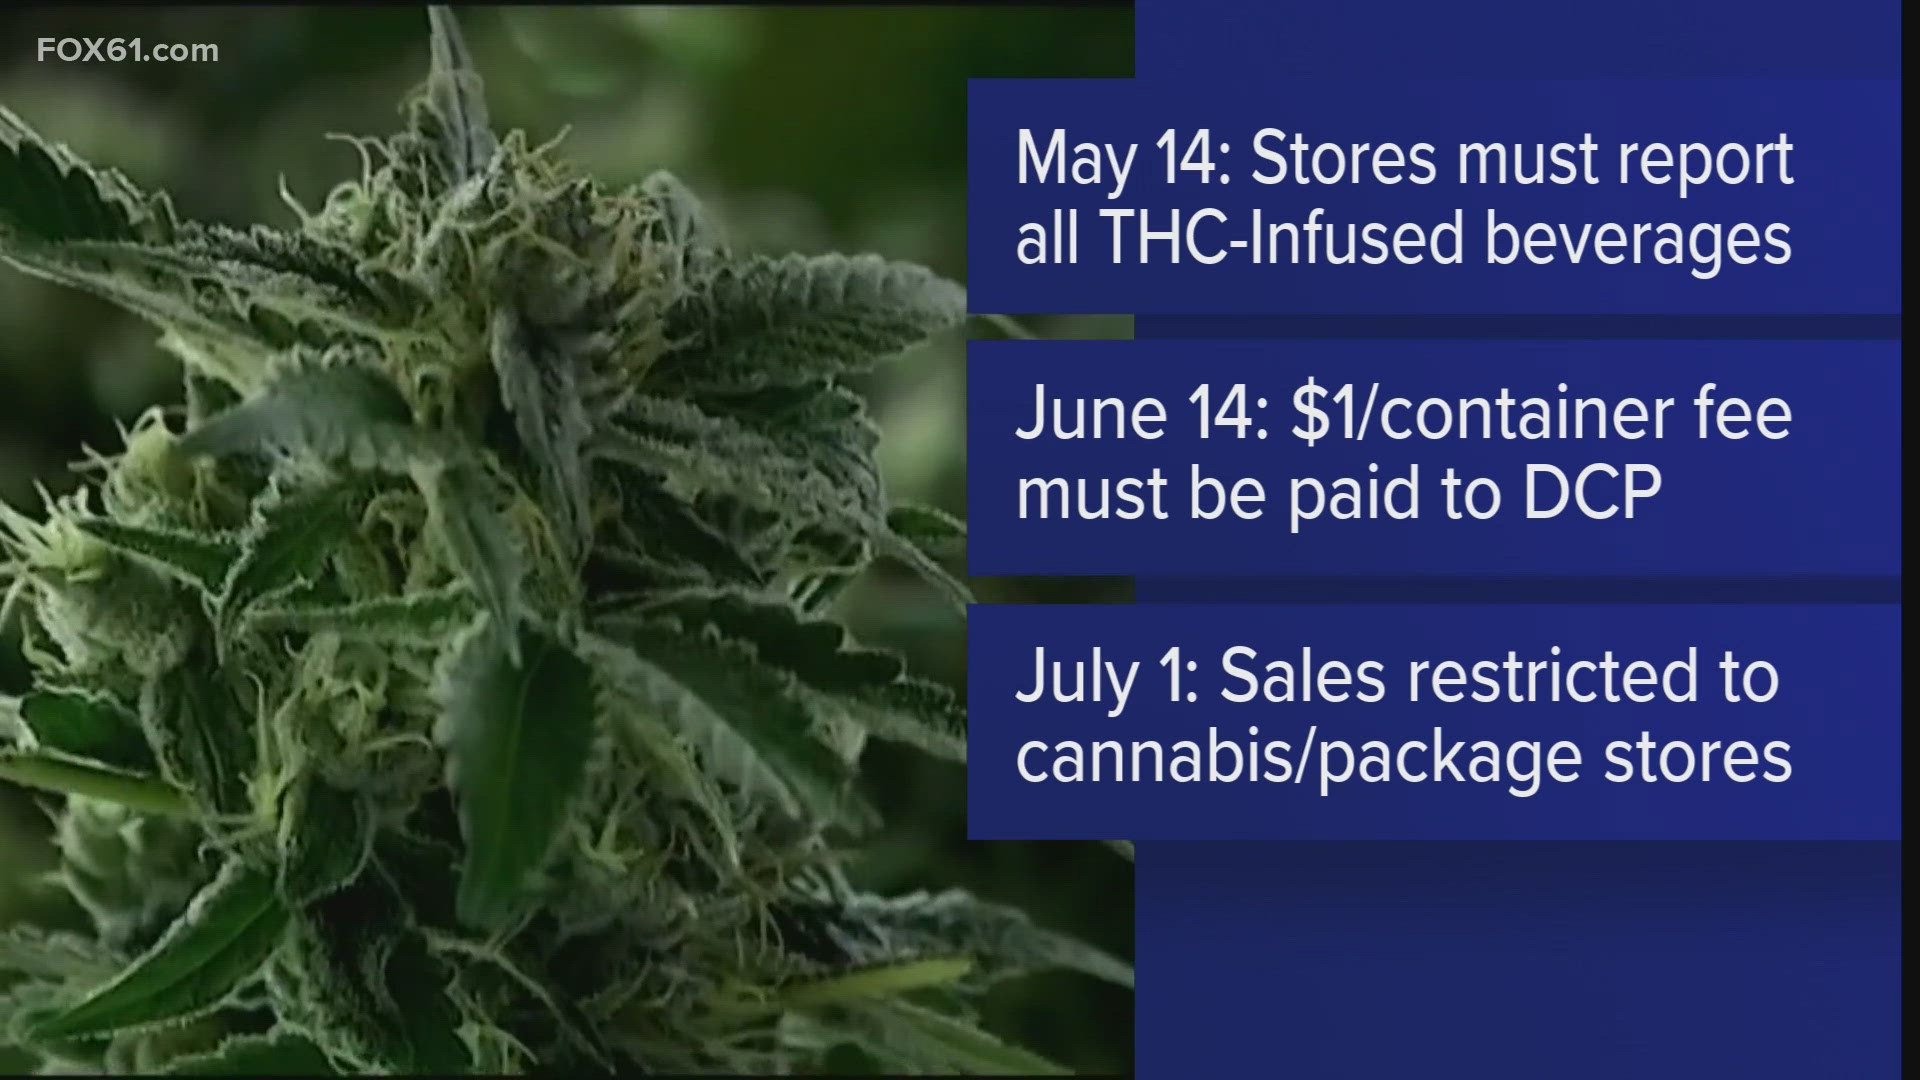 Businesses are asked to take an inventory on May 14 and must pay $1 per container by June 14.